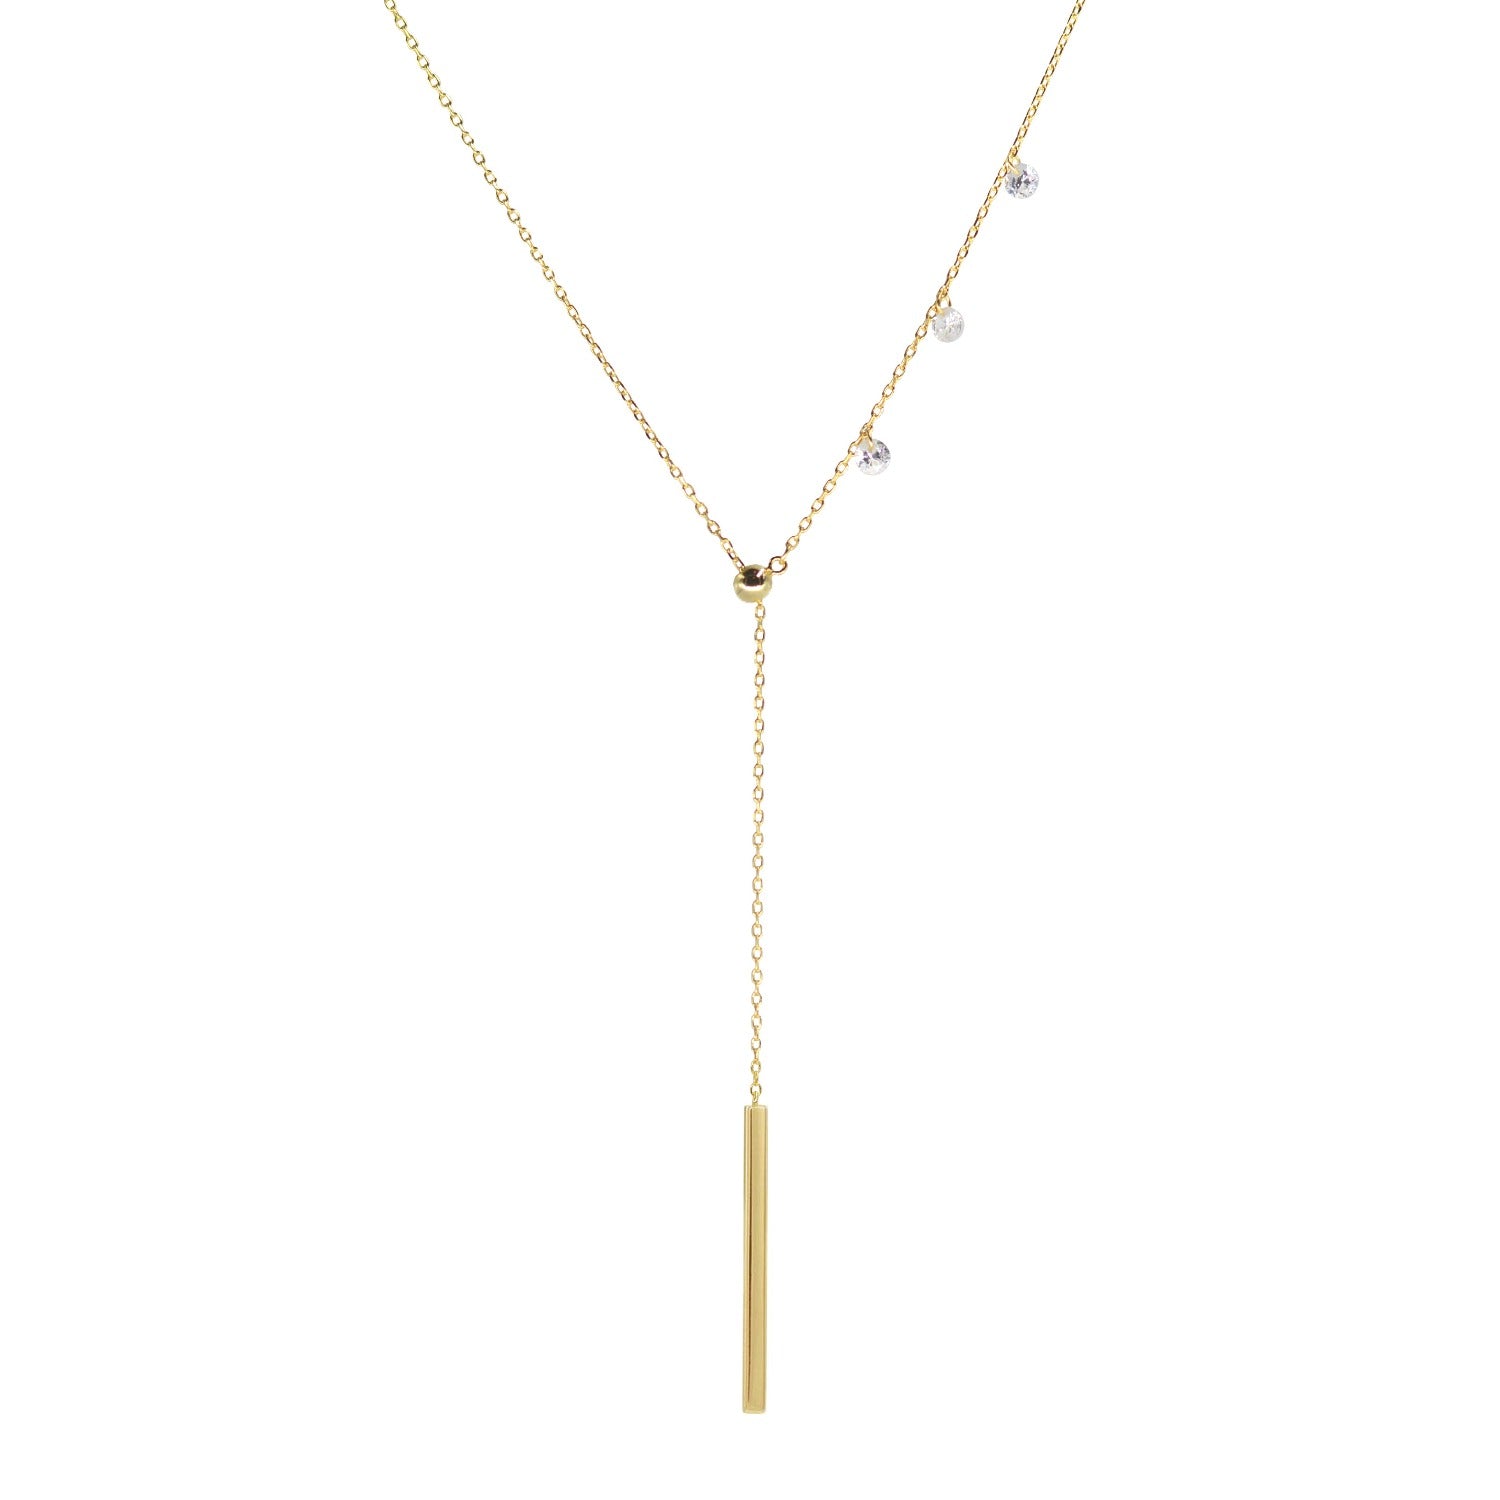 Double Slider lariat necklace with long bar in gold